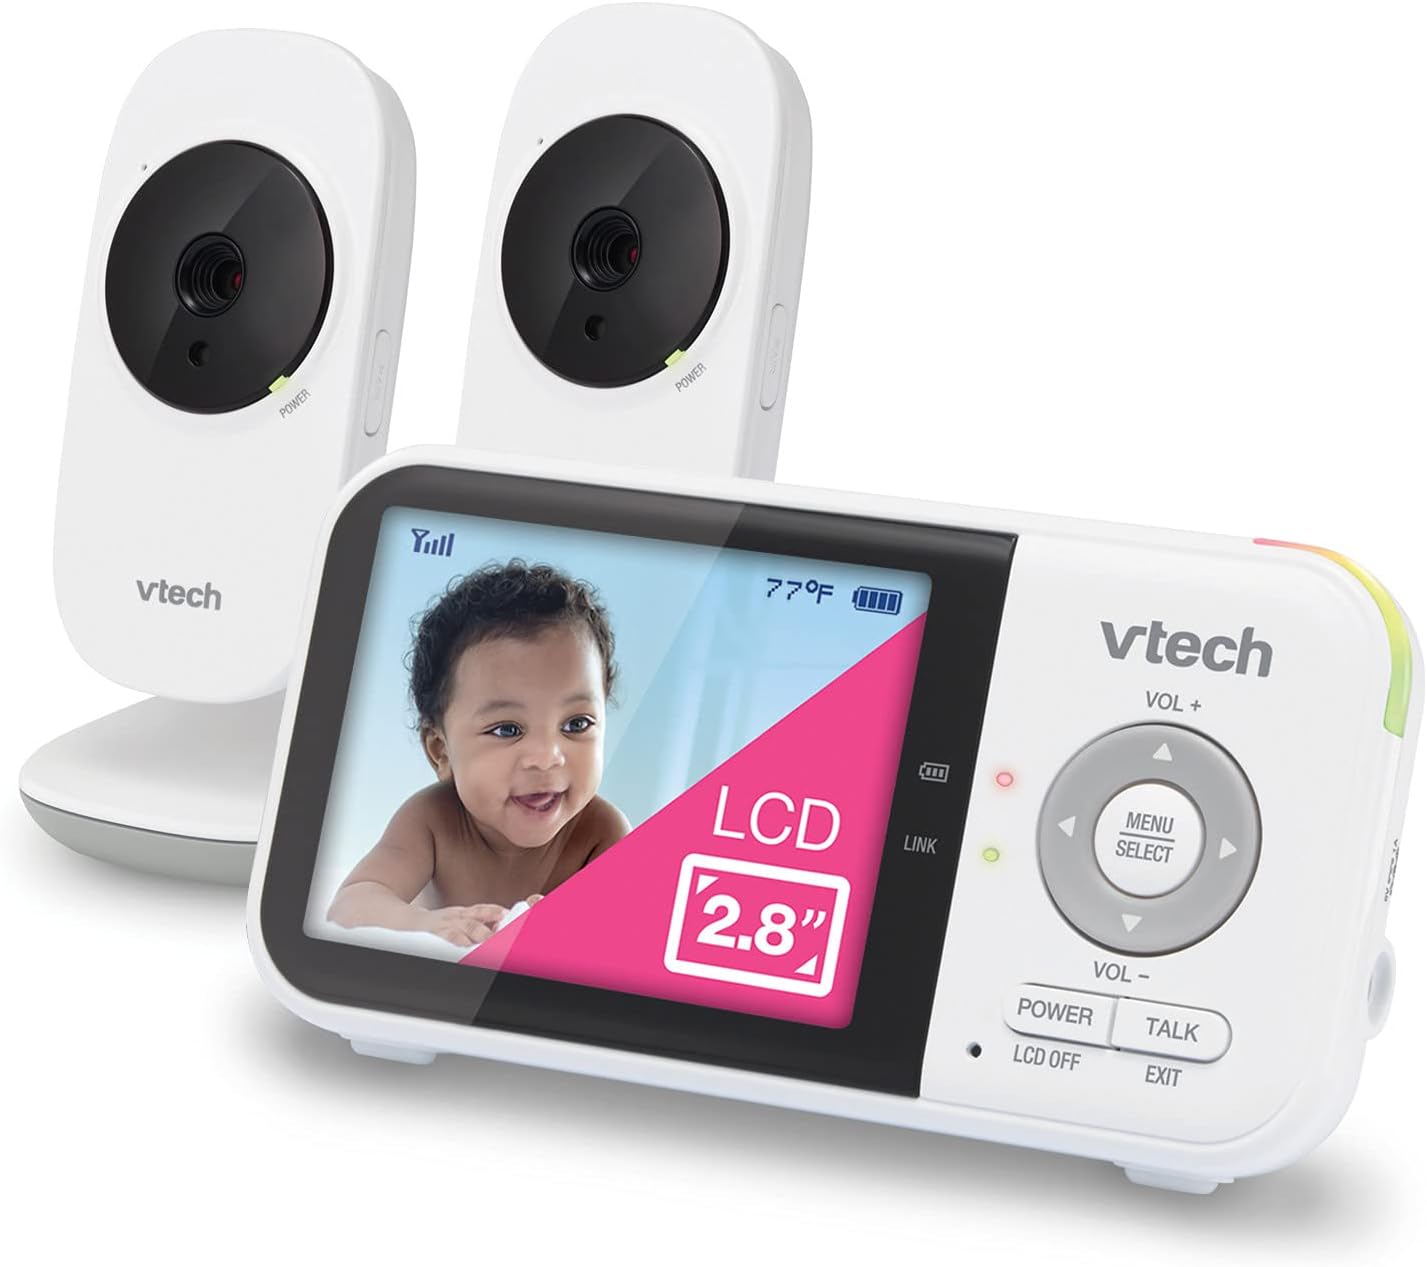 VTech VM819-2 Video Baby Monitor with 19-Hour Battery [...]